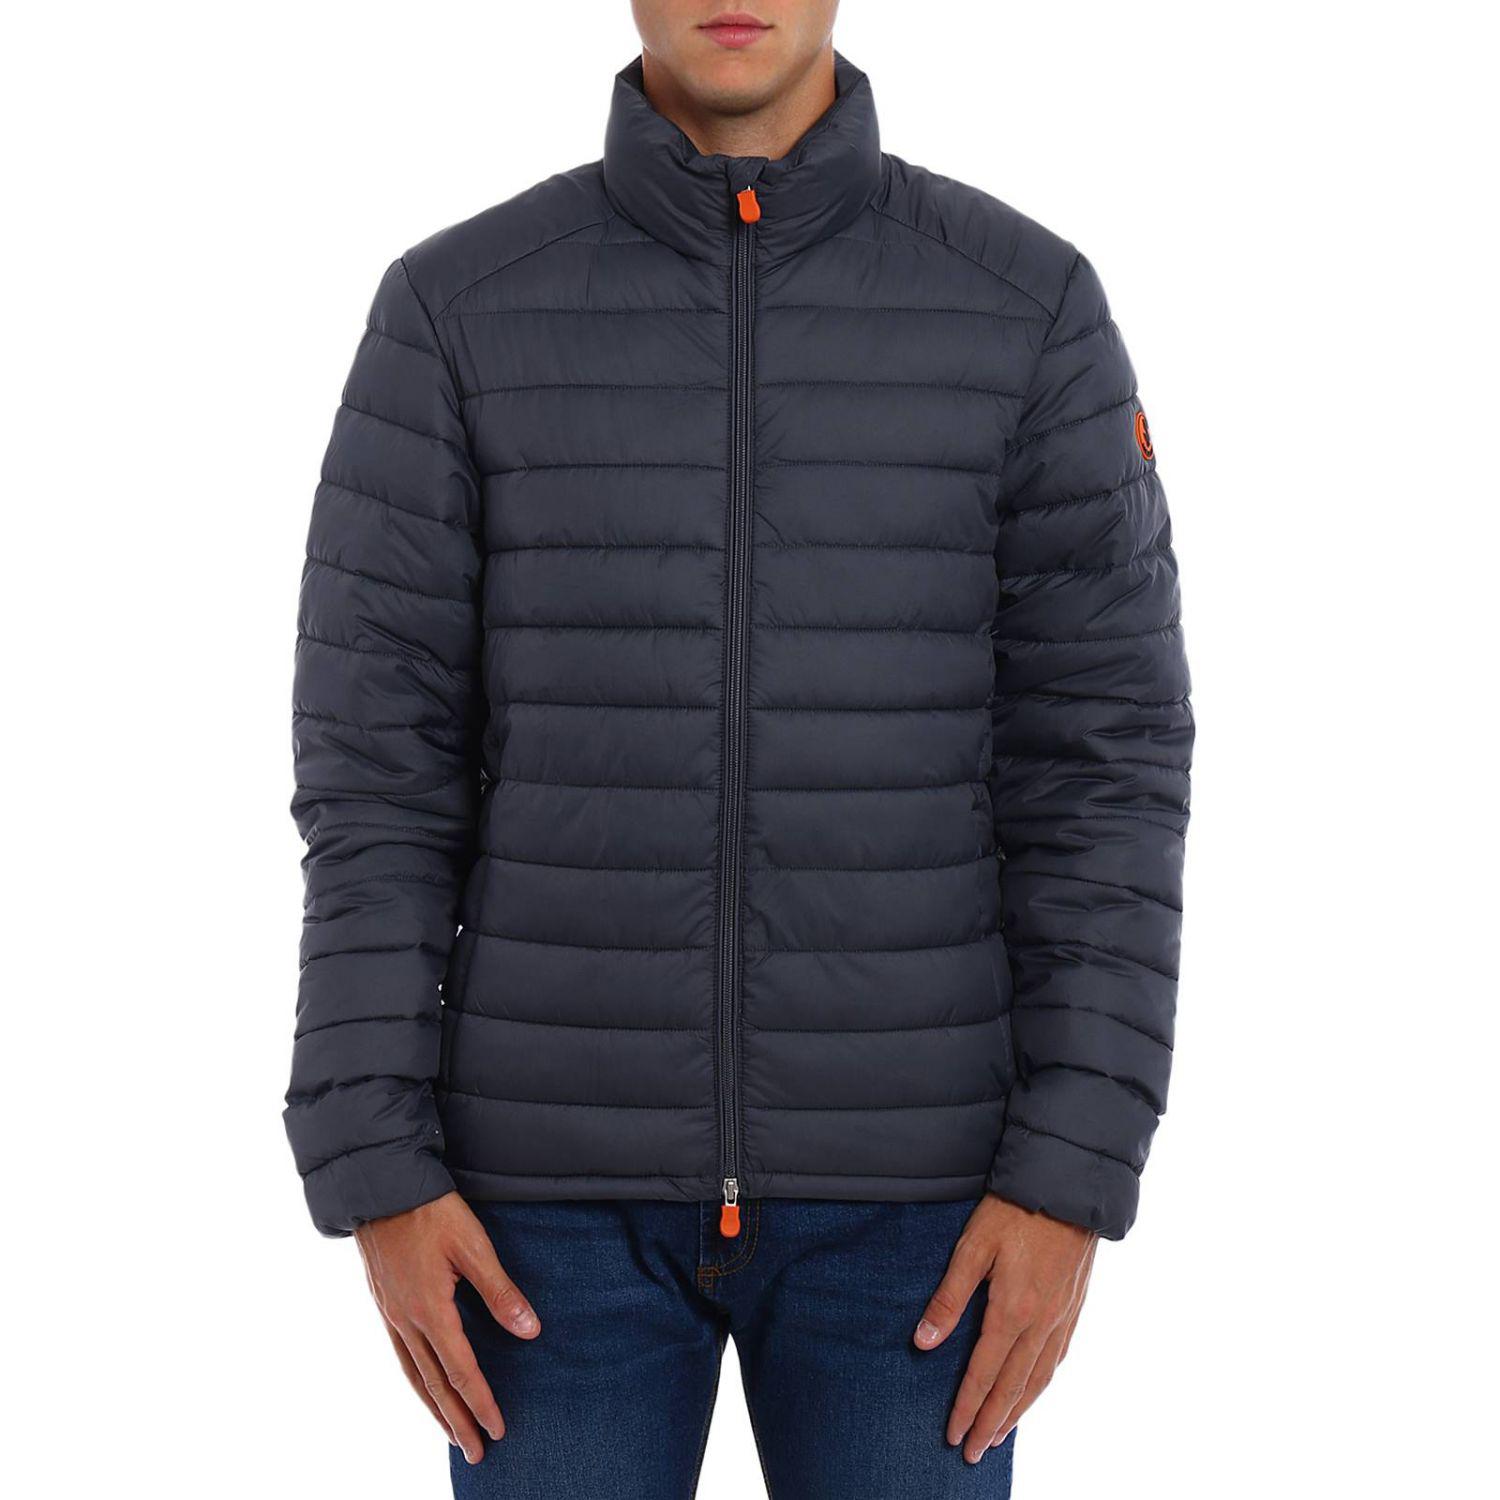 Lyst - Save The Duck Jacket Men in Blue for Men